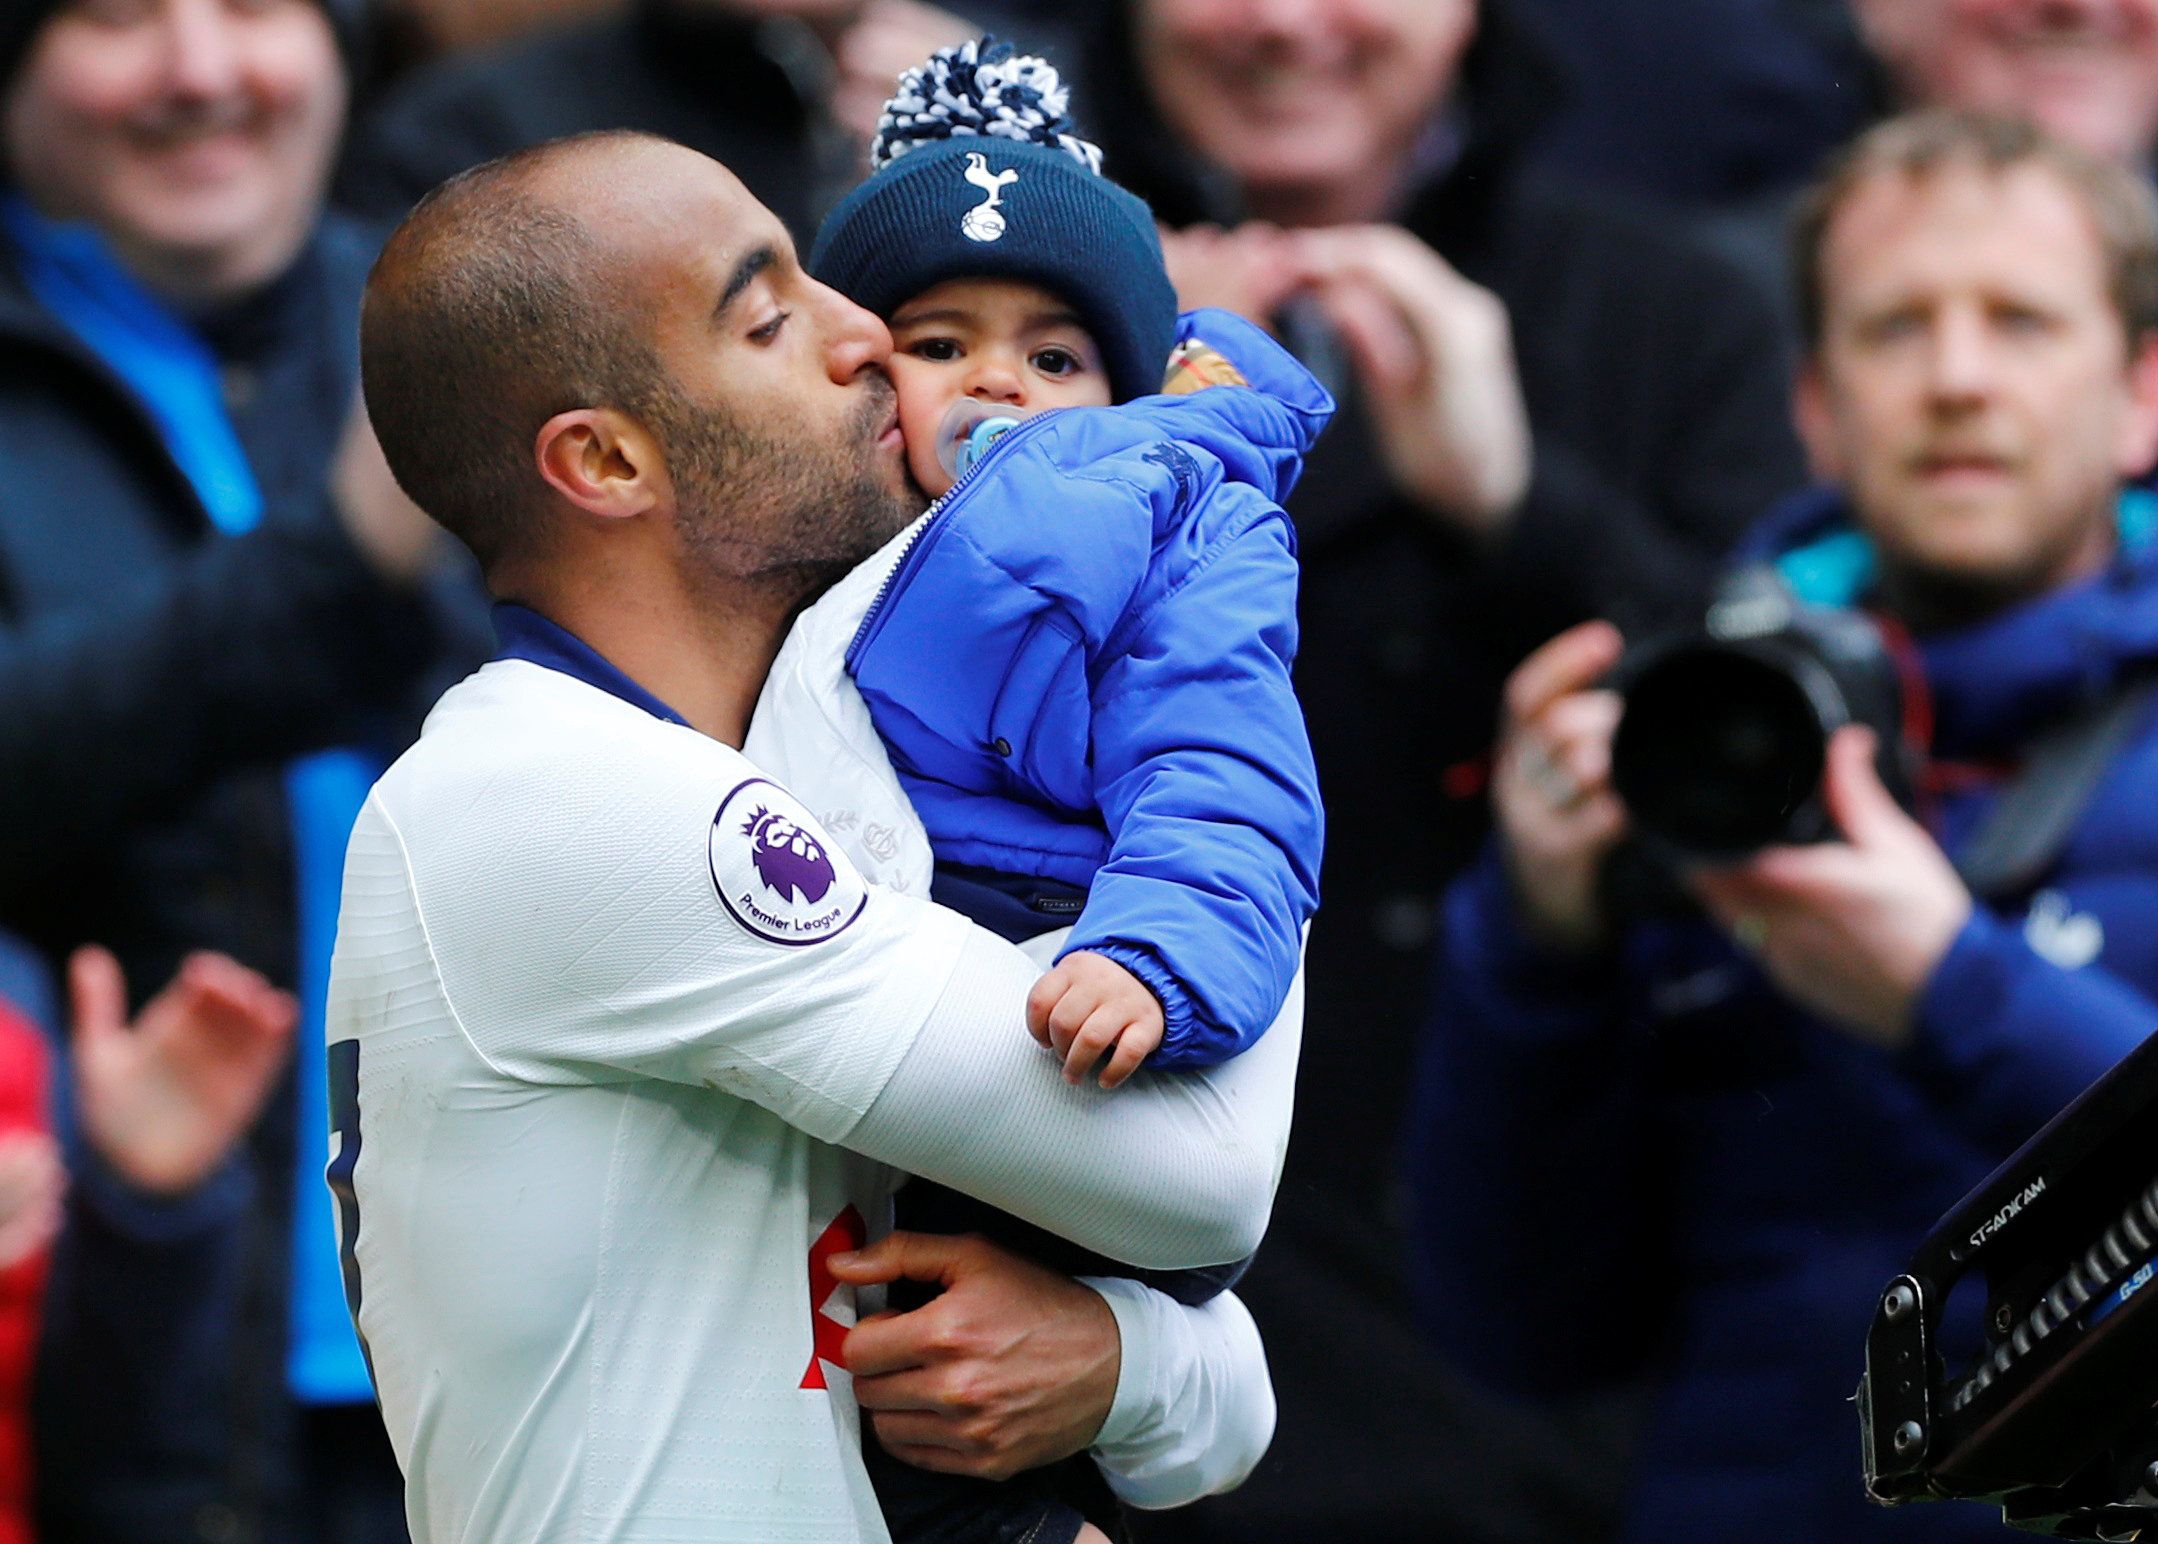 Soccer Football - Premier League - Tottenham Hotspur v Huddersfield Town - Tottenham Hotspur Stadium, London, Britain - April 13, 2019  Tottenham's Lucas Moura celebrates after the match with his son          REUTERS/Eddie Keogh  EDITORIAL USE ONLY. No use with unauthorized audio, video, data, fixture lists, club/league logos or 